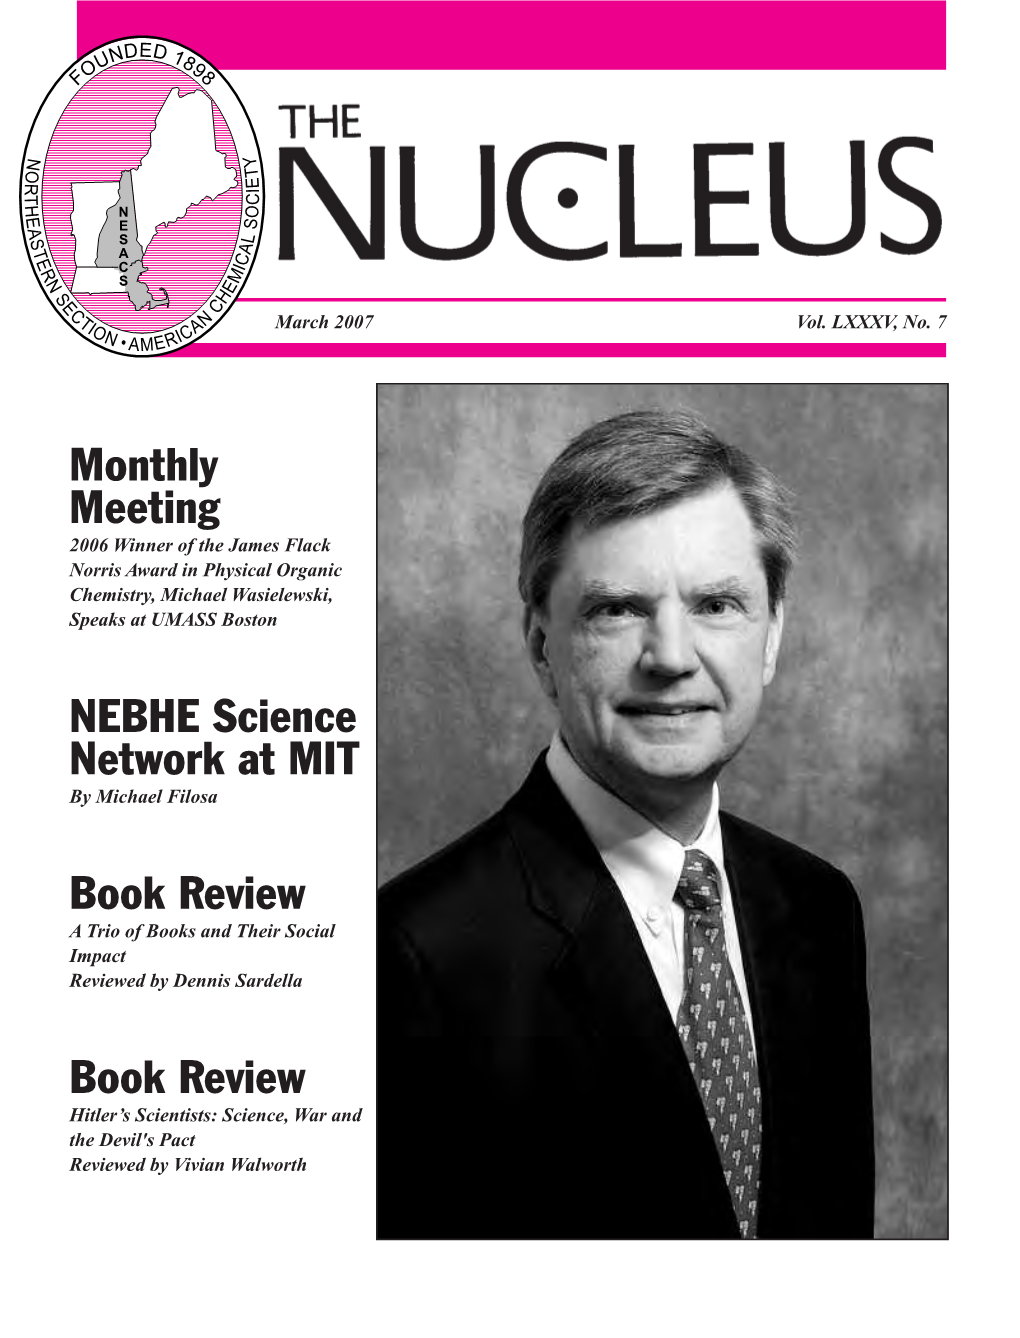 March 07 NUCLEUS for The